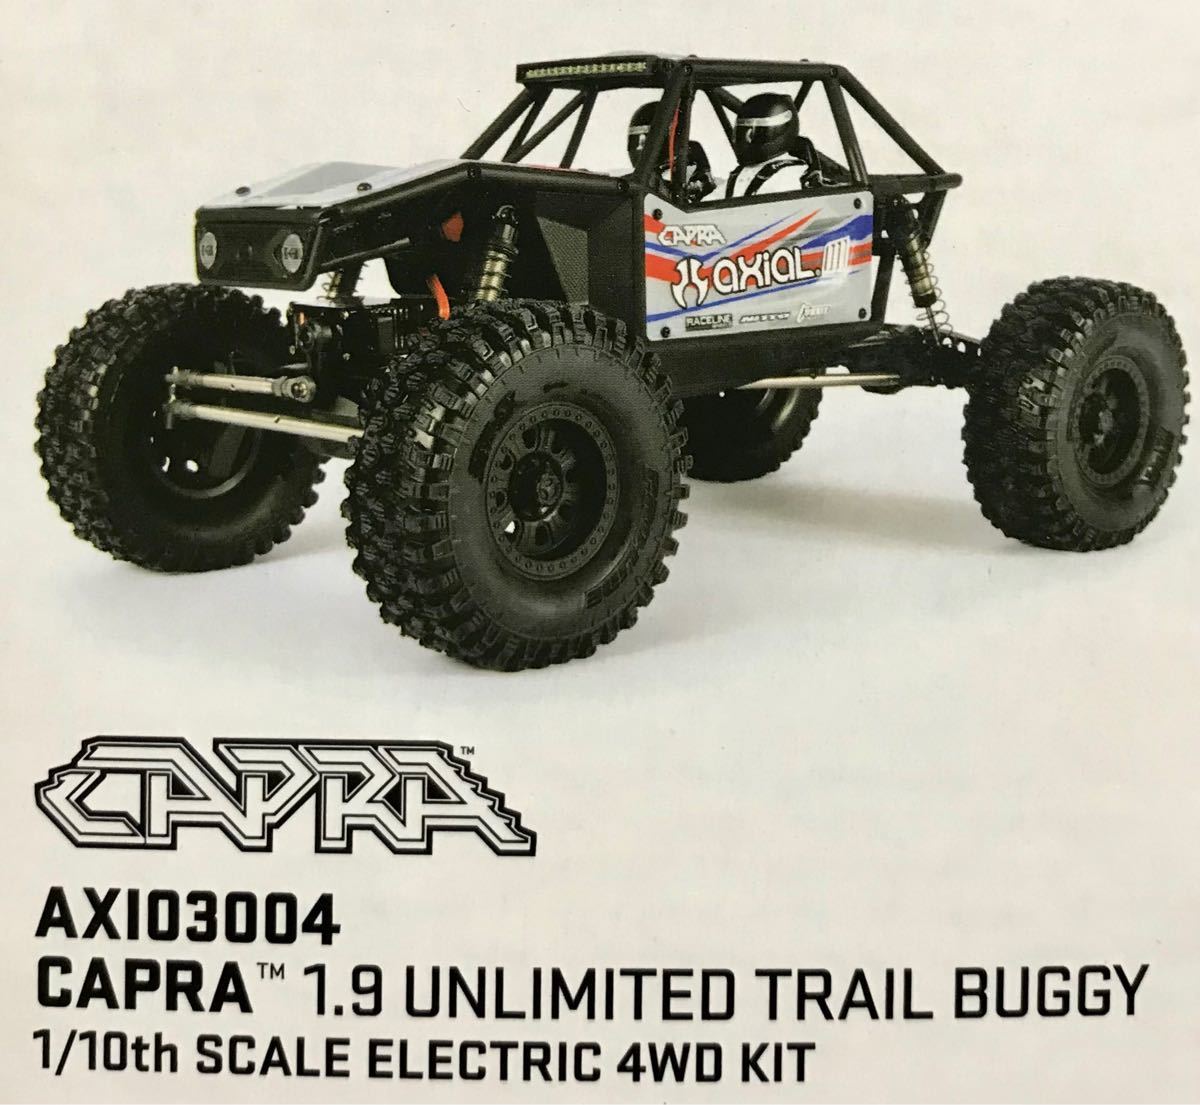 Axial CAPRA 1.9 UNLIMITED TRAIL BUGGY 組立キット 新品 アキシャル カプラ ロッククローラー